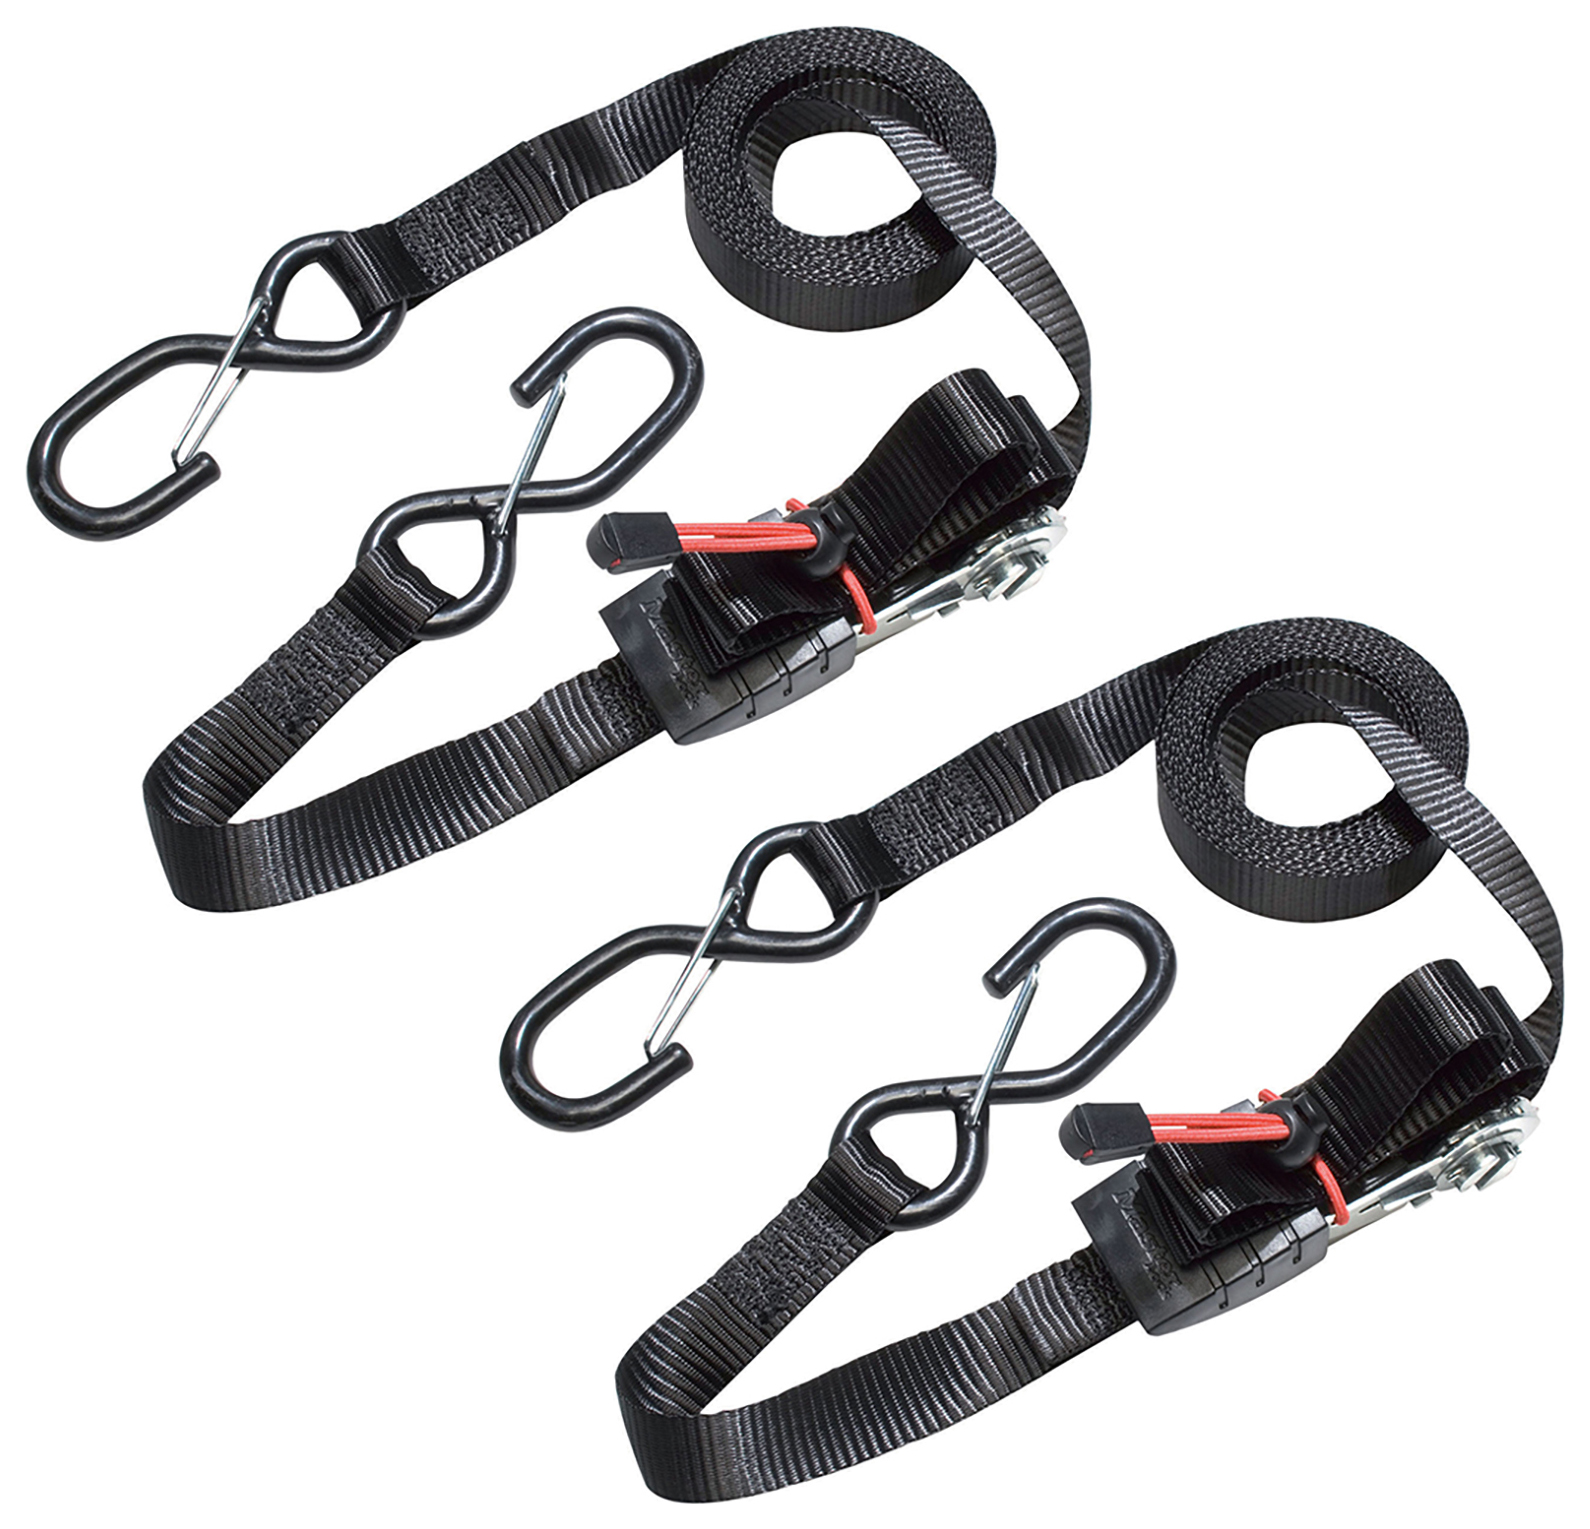 Master Lock Set of 2 x 4.25m Ratchet Tie Downs with S Hooks | Wickes.co.uk